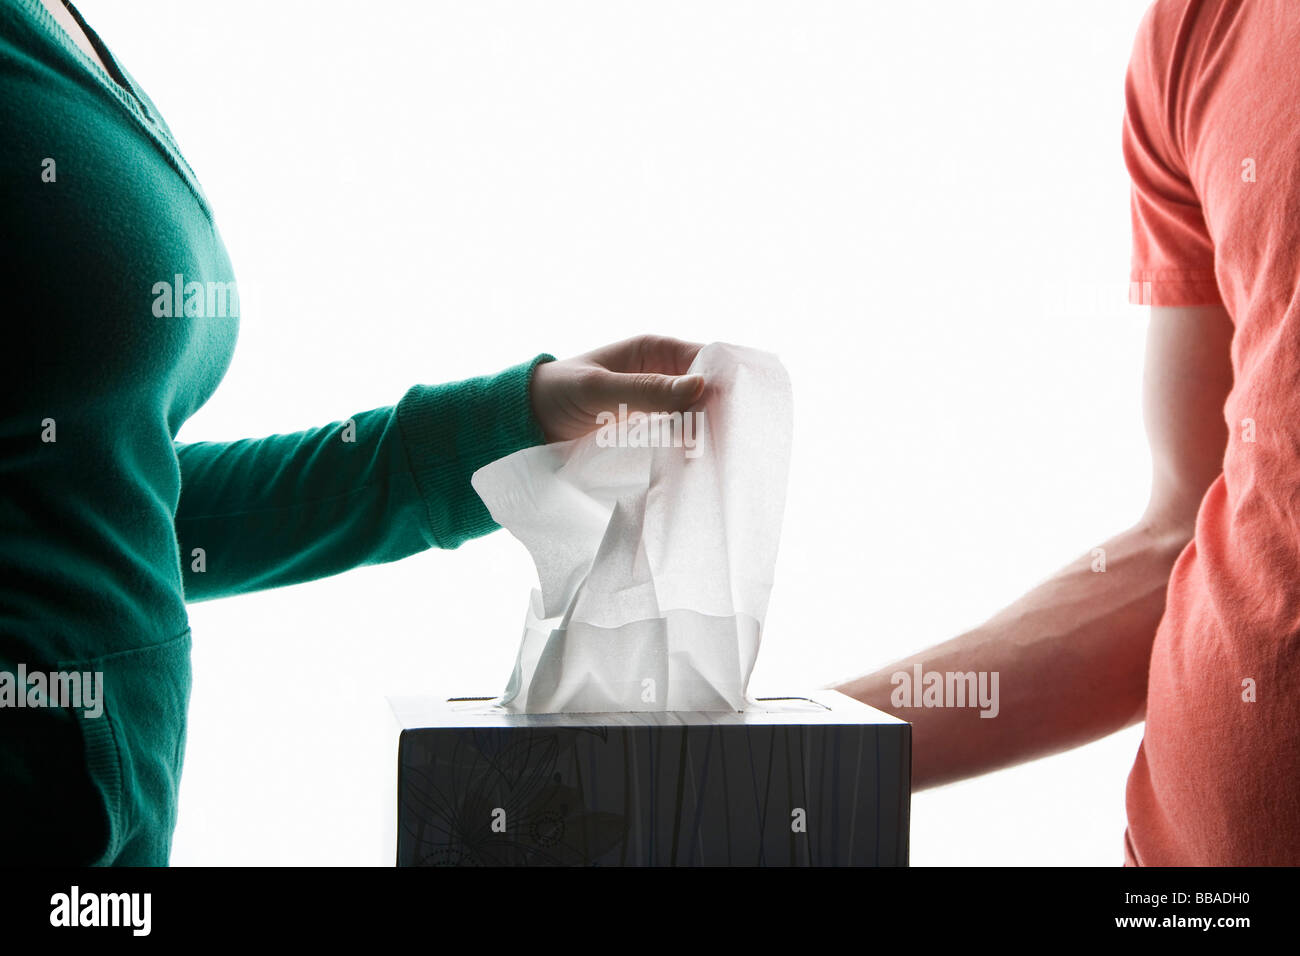 Two people with a box of tissues, midsection Stock Photo